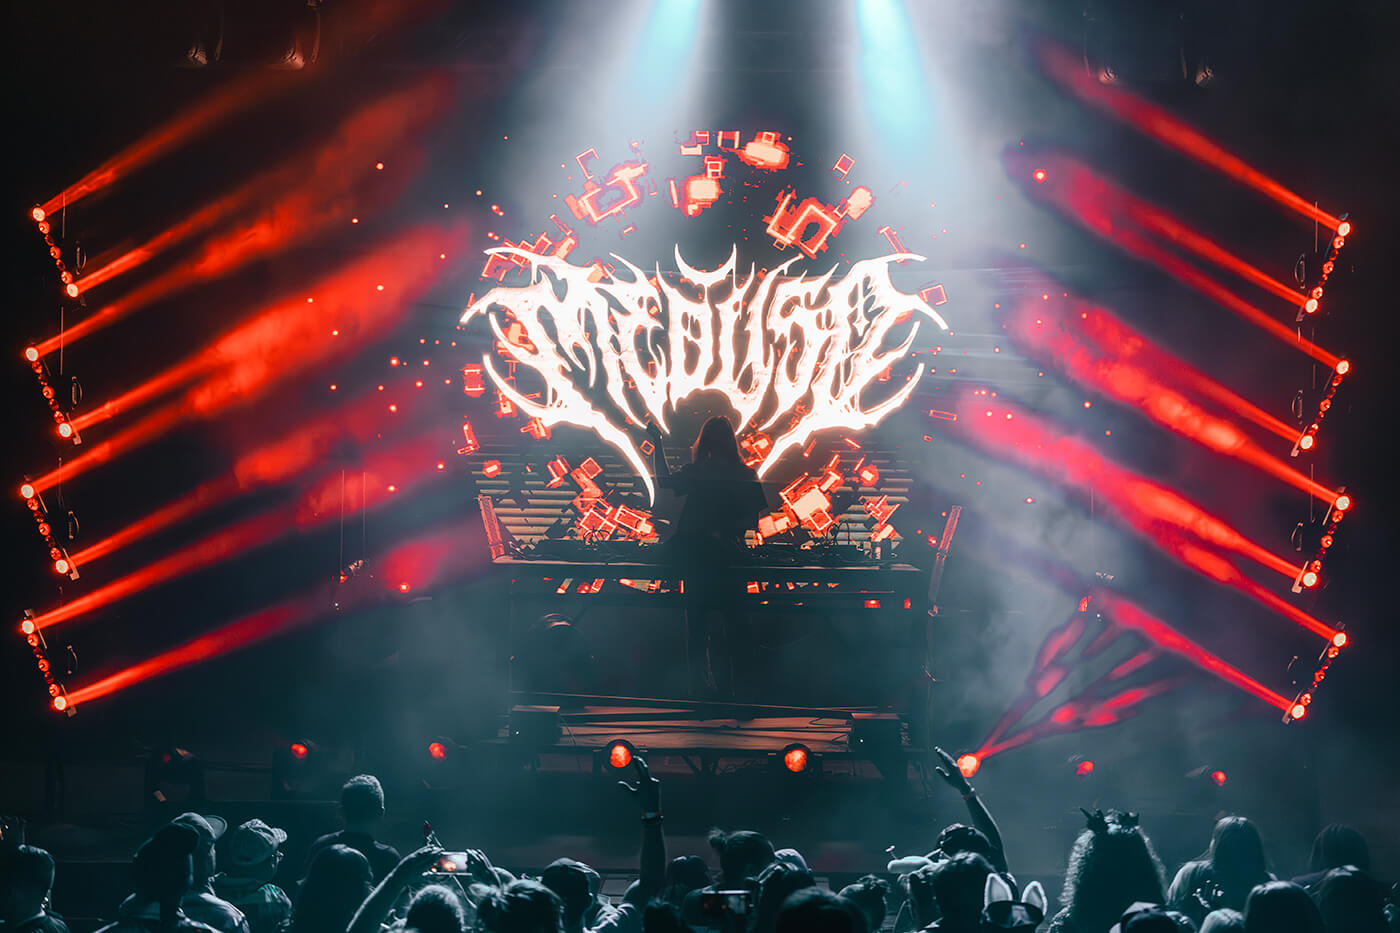 Meduso performing live against a backdrop of metal-inspired visuals